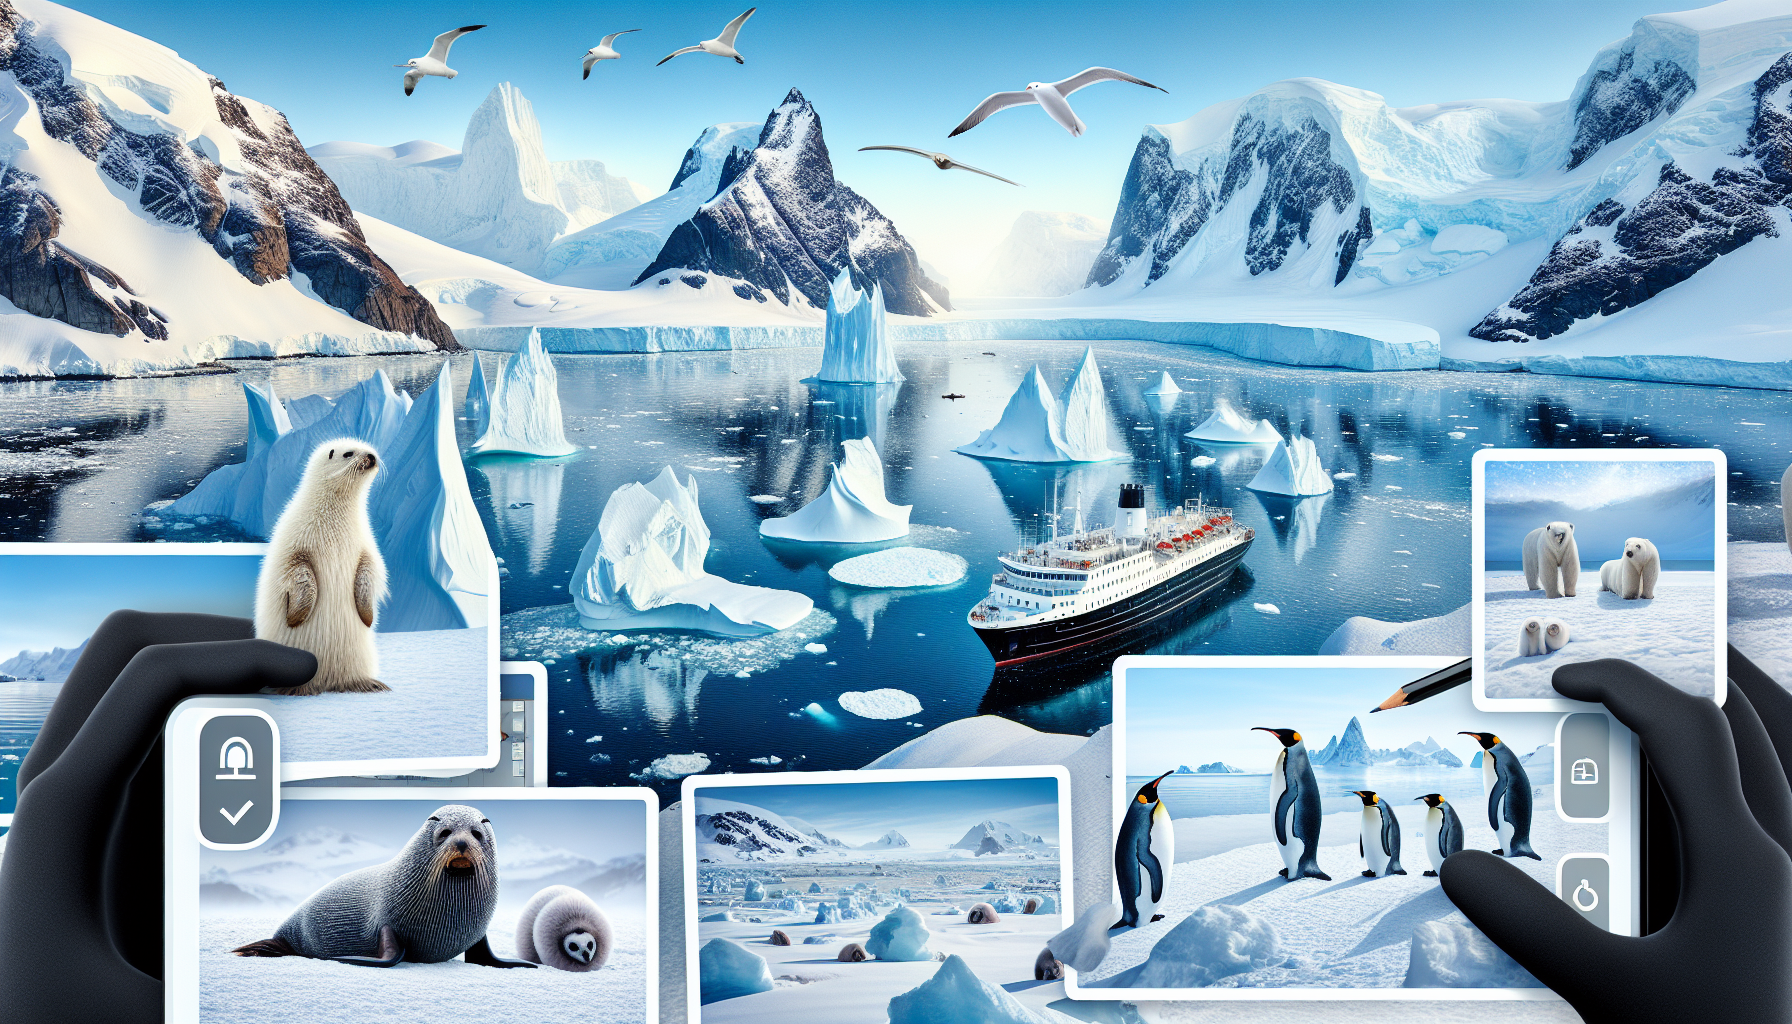 explore the wonders of antarctica with our travel and cruise packages. discover the ideal times to visit antarctica and make the most of your expedition with our expert advice.